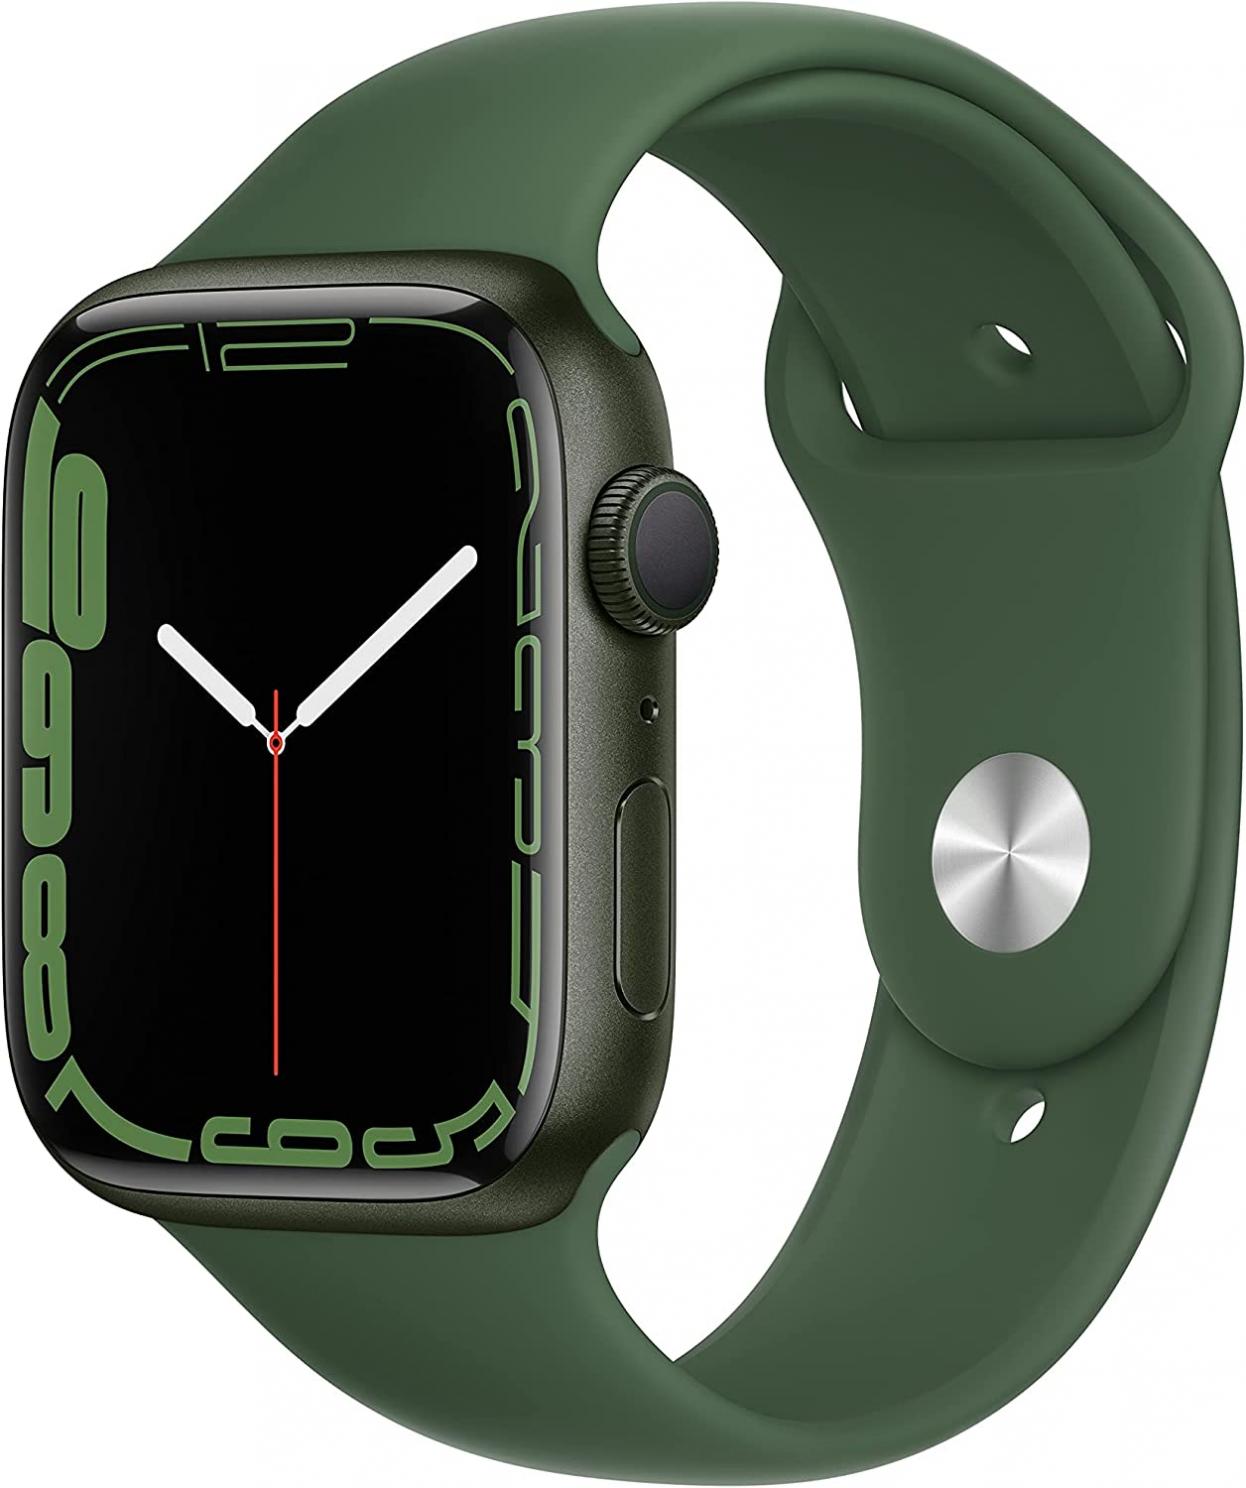 Apple Watch Series 7 [GPS 45mm] Smart Watch w/ Green Aluminum Case with Clover Sport Band. Fitness Tracker, Blood Oxygen & ECG Apps, Always-On Retina Display, Water Resistant AppleCare